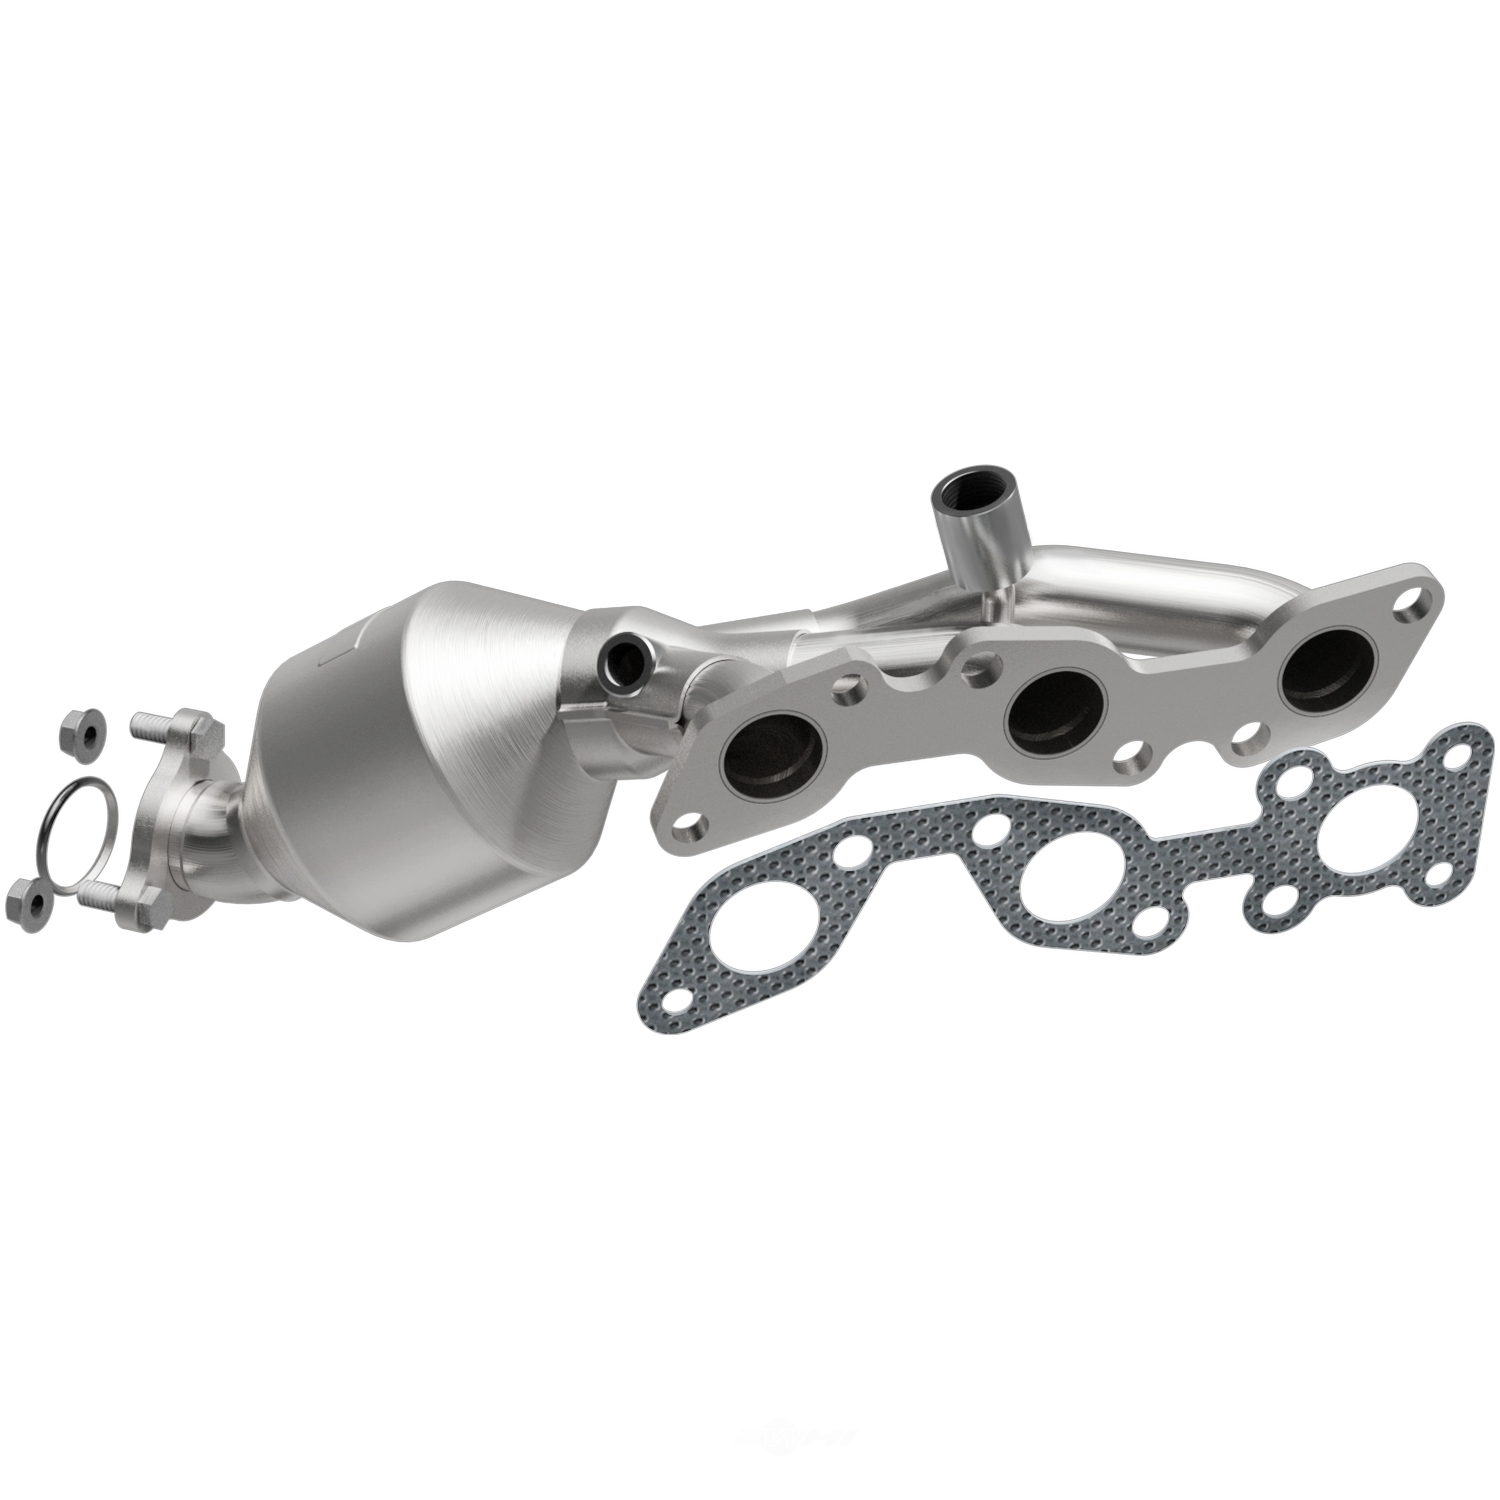 BREXHAUST 49 STATE CONVERTERS - BRExhaust Federal Direct-Fit Premium Load OBDII Exhaust Manifold with In - BSF 096-1447